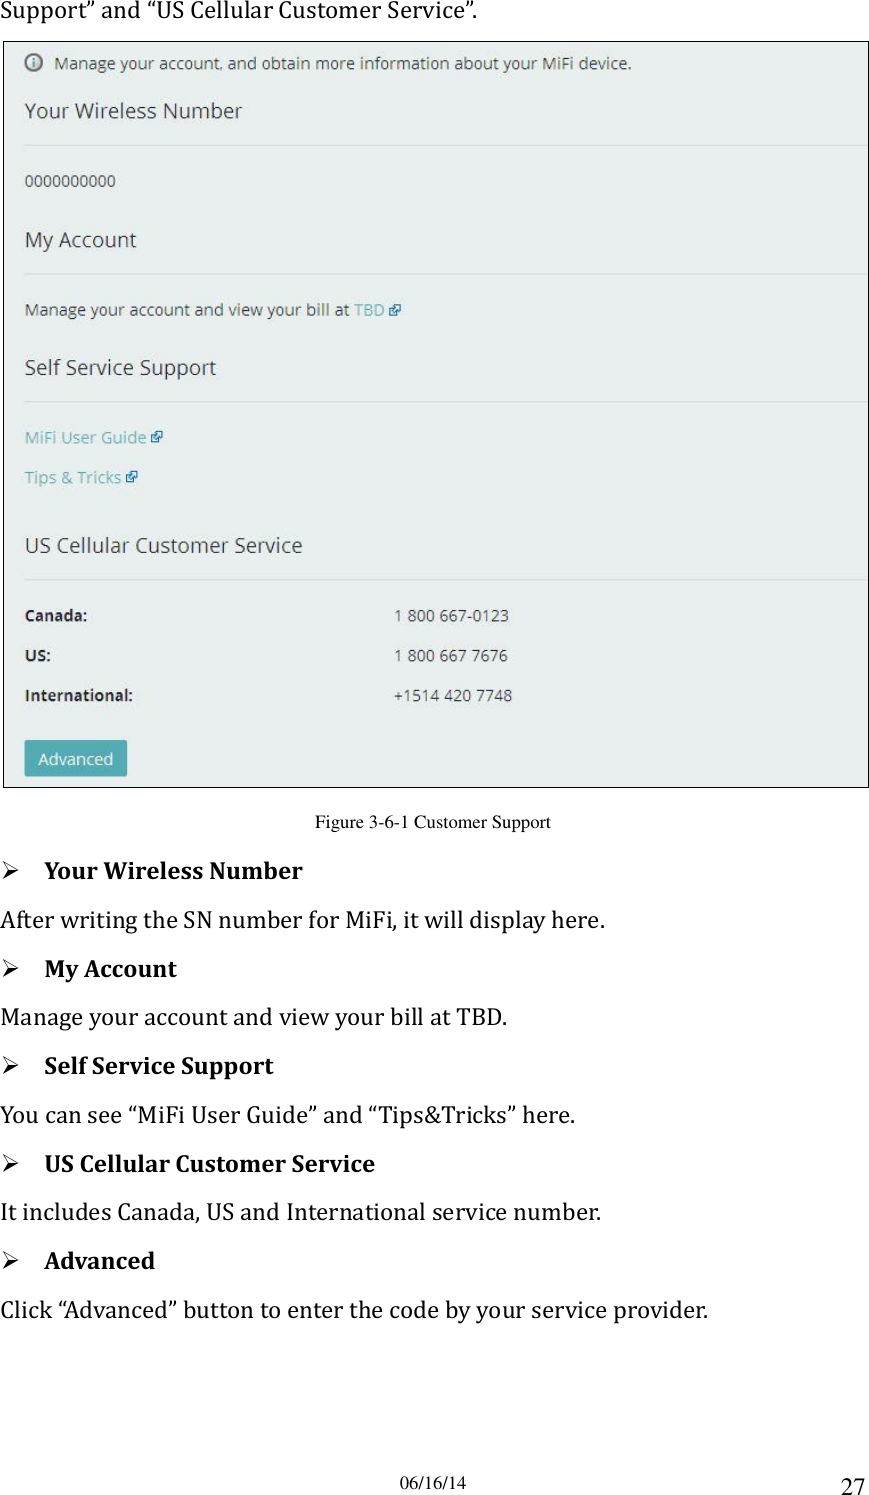 06/16/14 27 Support” and “US Cellular Customer Service”.  Figure 3-6-1 Customer Support  Your Wireless Number After writing the SN number for MiFi, it will display here.  My Account Manage your account and view your bill at TBD.  Self Service Support You can see “MiFi User Guide” and “Tips&amp;Tricks” here.  US Cellular Customer Service It includes Canada, US and International service number.  Advanced Click “Advanced” button to enter the code by your service provider. 